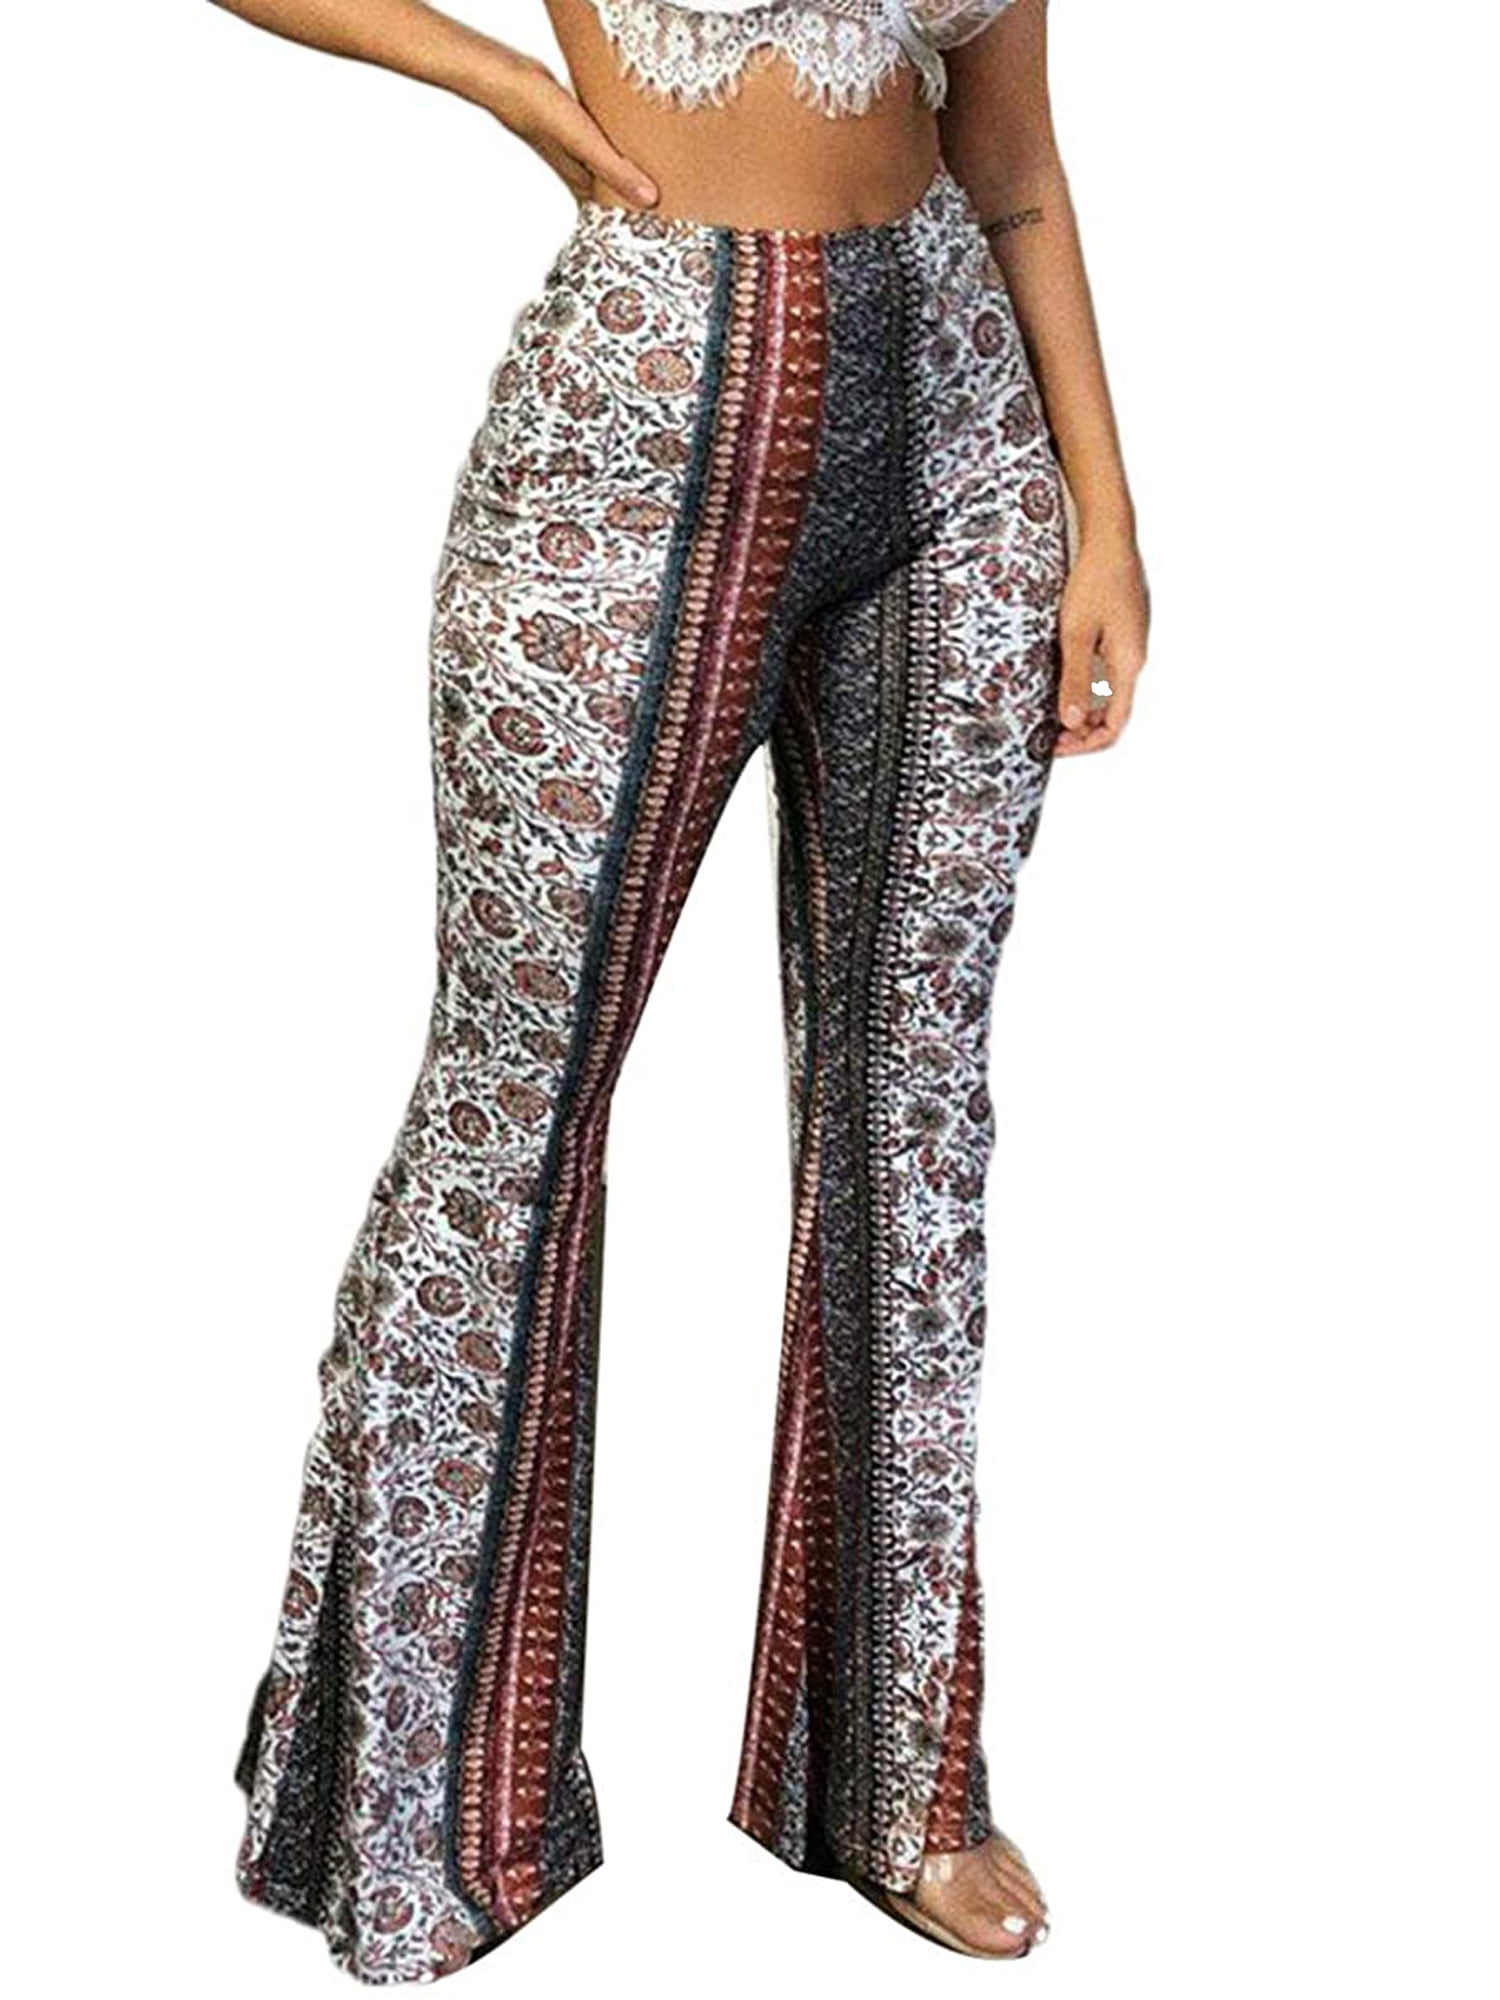 Women’s Leopard Printed High Waisted Wide Leg Trousers Casual Pockets Crop Pants 